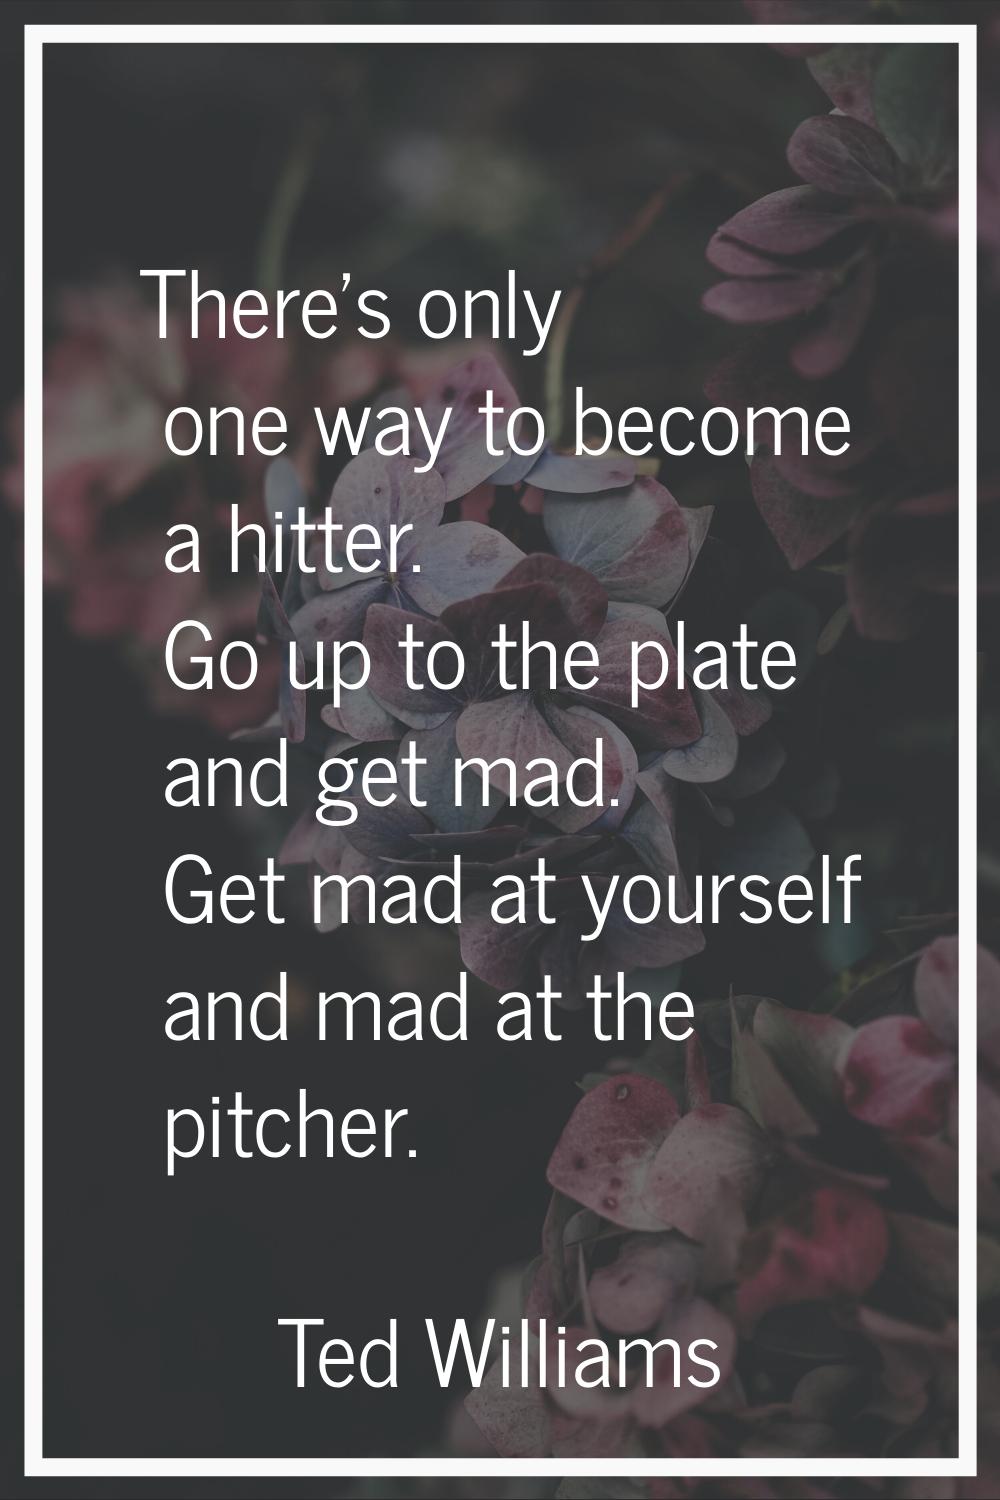 There's only one way to become a hitter. Go up to the plate and get mad. Get mad at yourself and ma